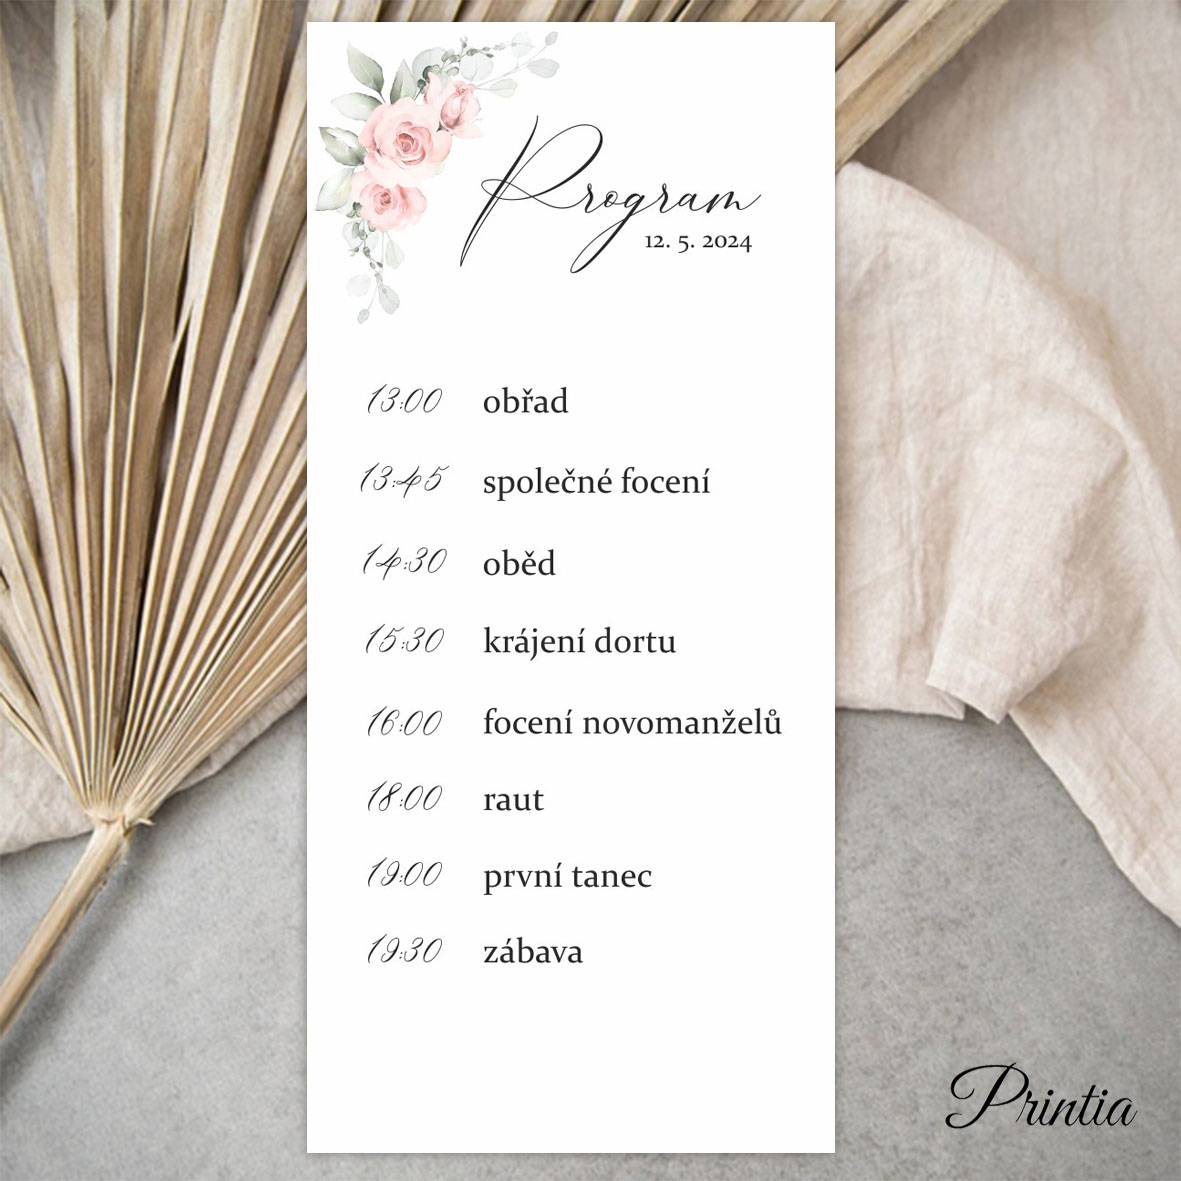 Wedding day schedule with pink flowers